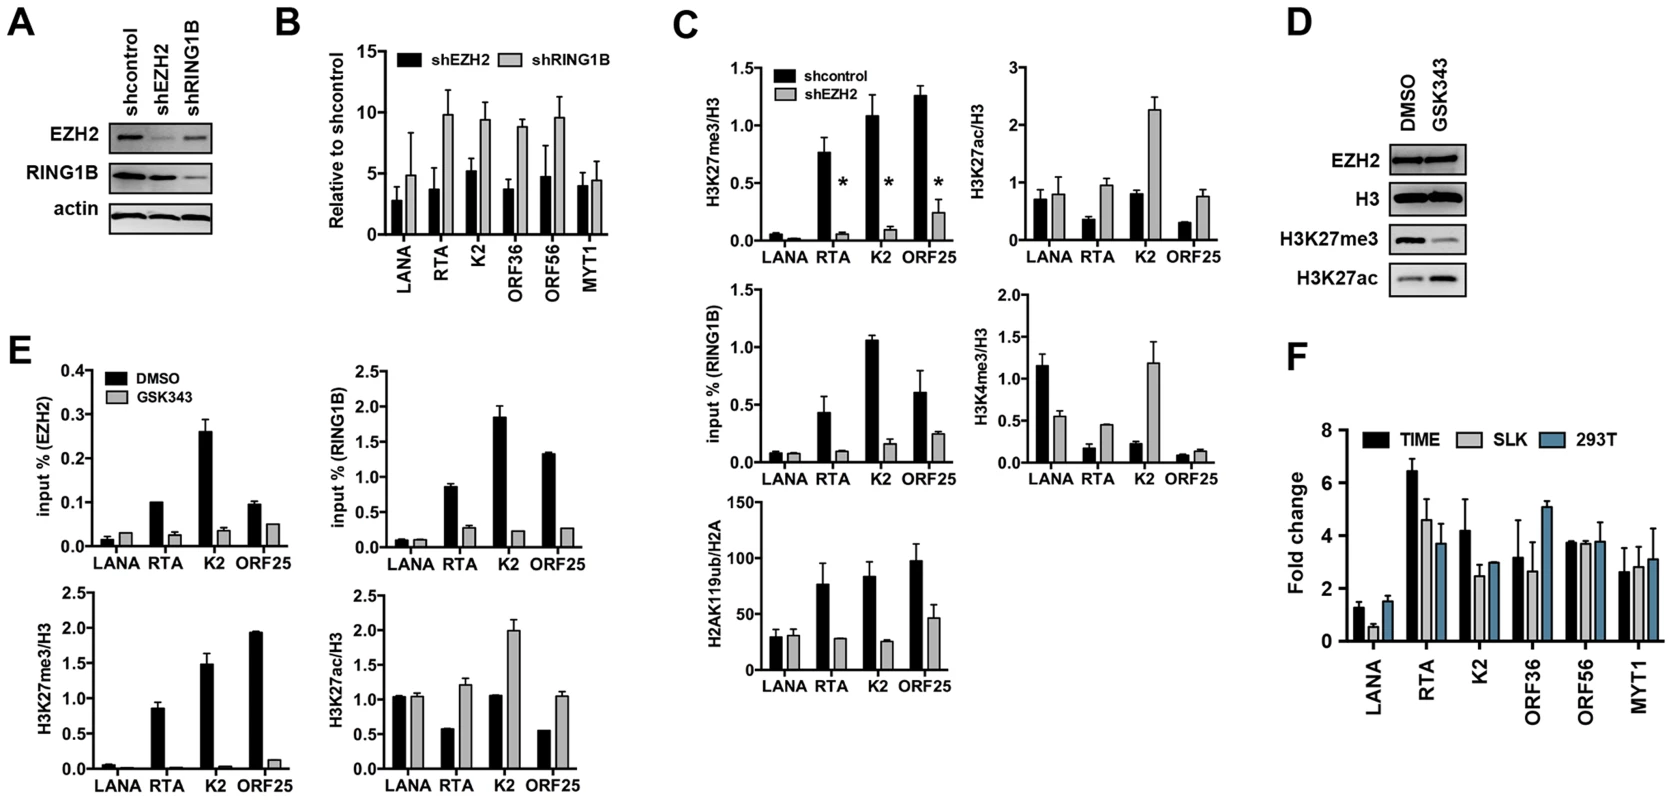 Both PRC2 and PRC1 are involved in the inhibition of lytic gene expression following <i>de novo</i> infection.